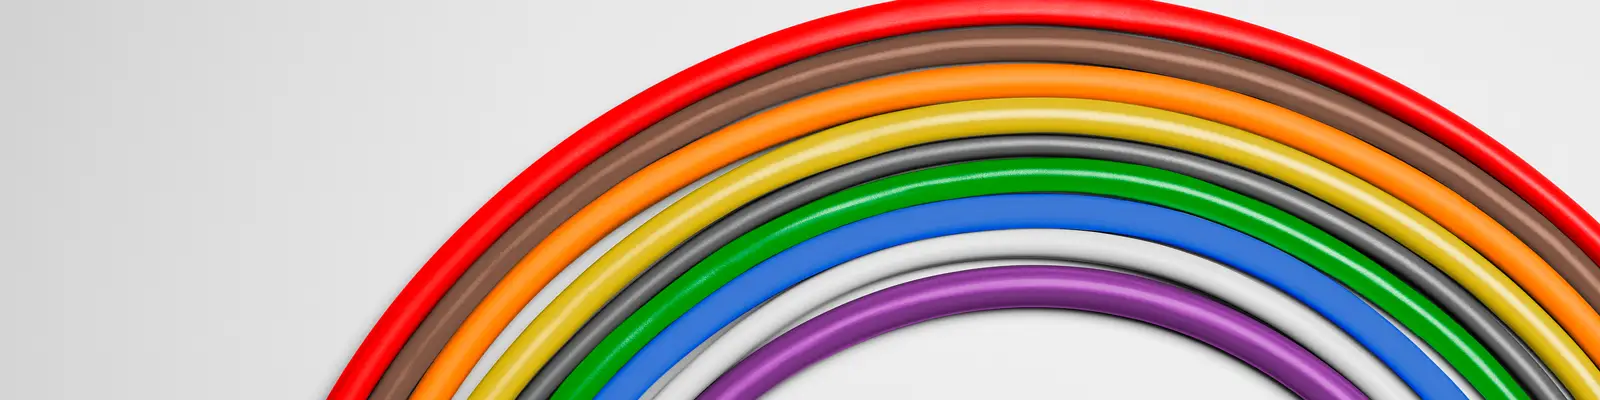 ServicePro-X® | No Pulling Lubricant Required - Single Conductors in Conduit | Every Color of the Rainbow